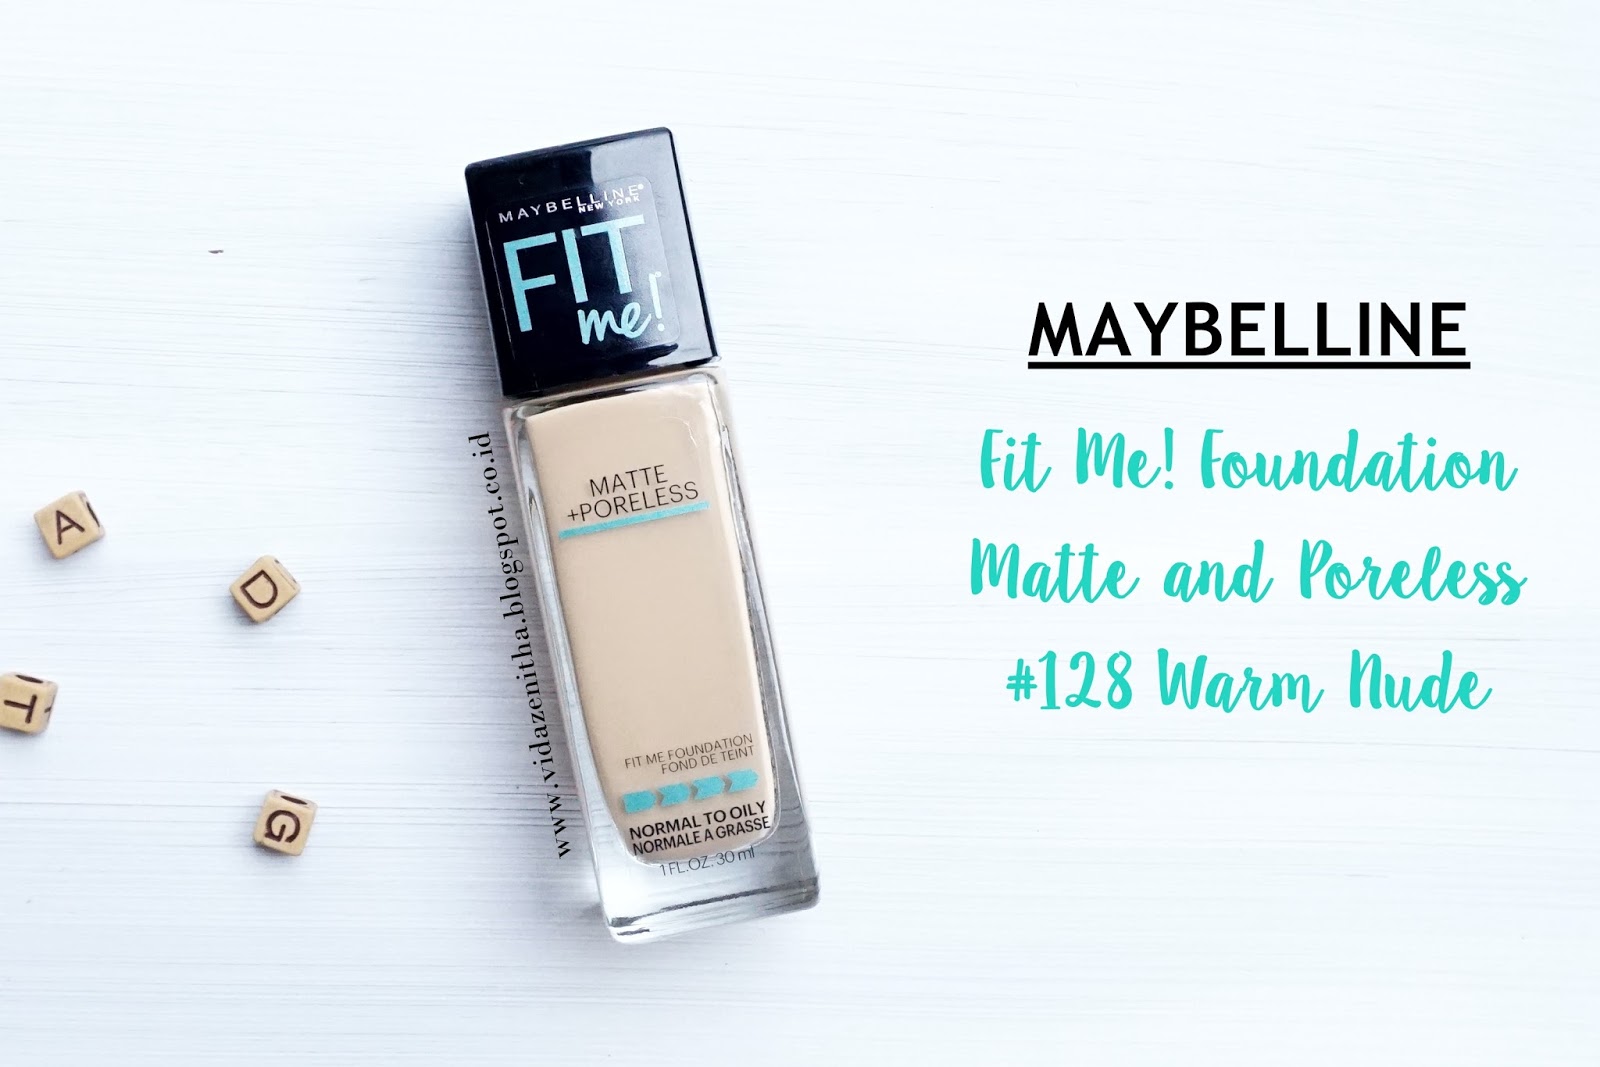 [REVIEW] MAYBELLINE FIT ME! FOUNDATION MATTE+PORELESS #128 